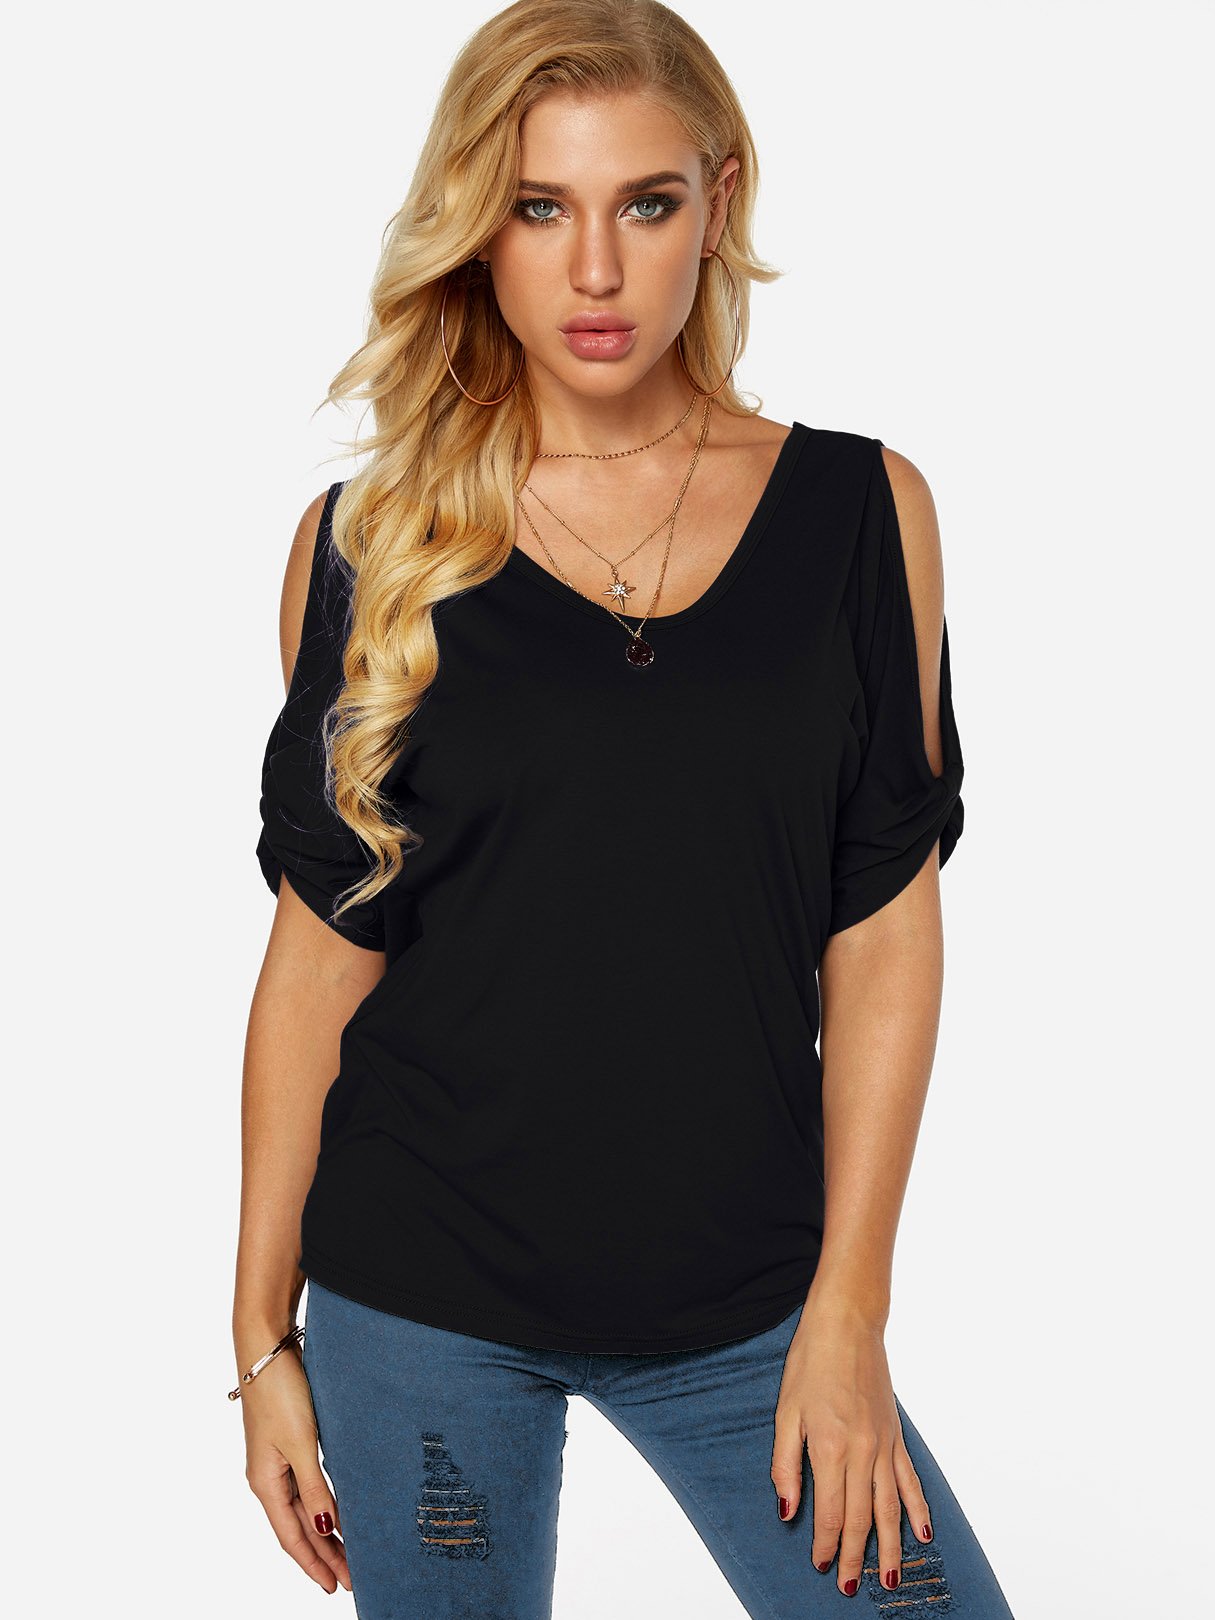 Backless T-Shirts